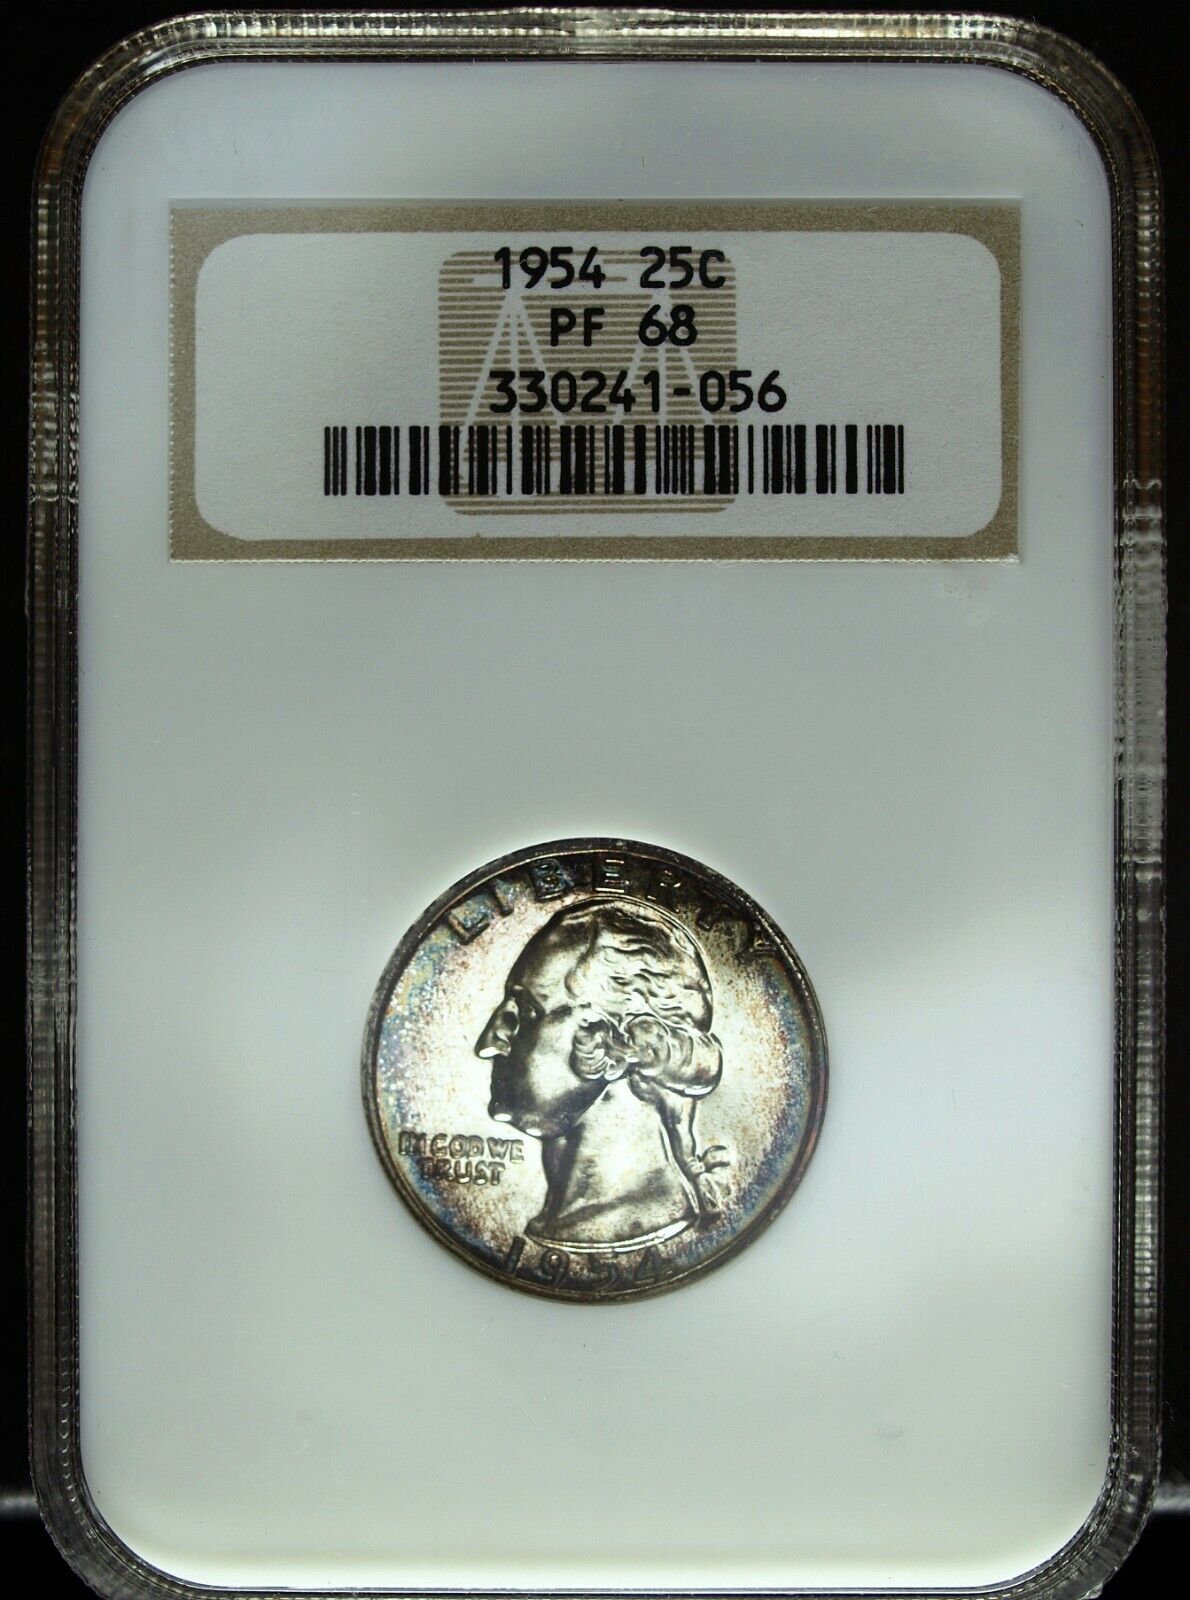 1954 NGC Proof 68 Washington Silver Quarter ☆☆ Great For Sets ☆☆ 056